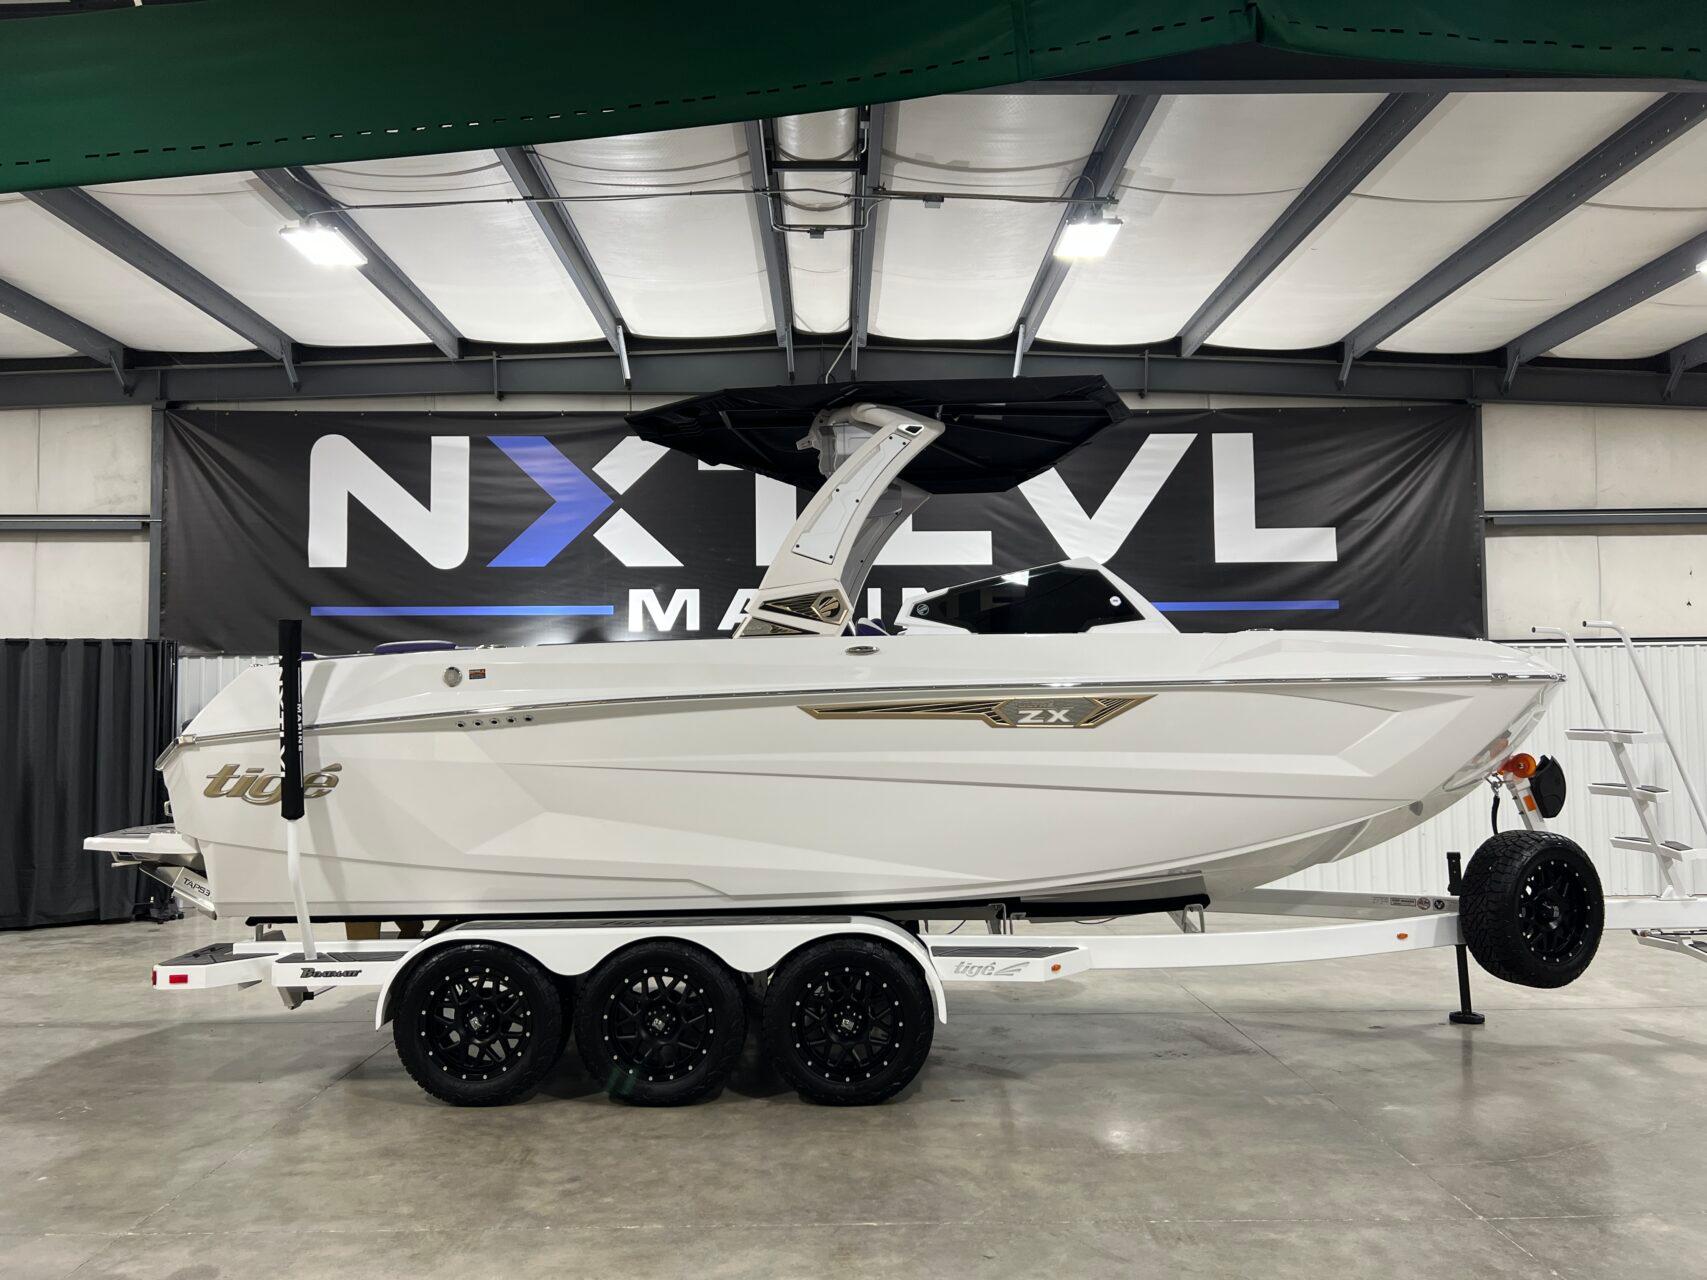 Tigé 23zx boats for sale in Texas - boats.com